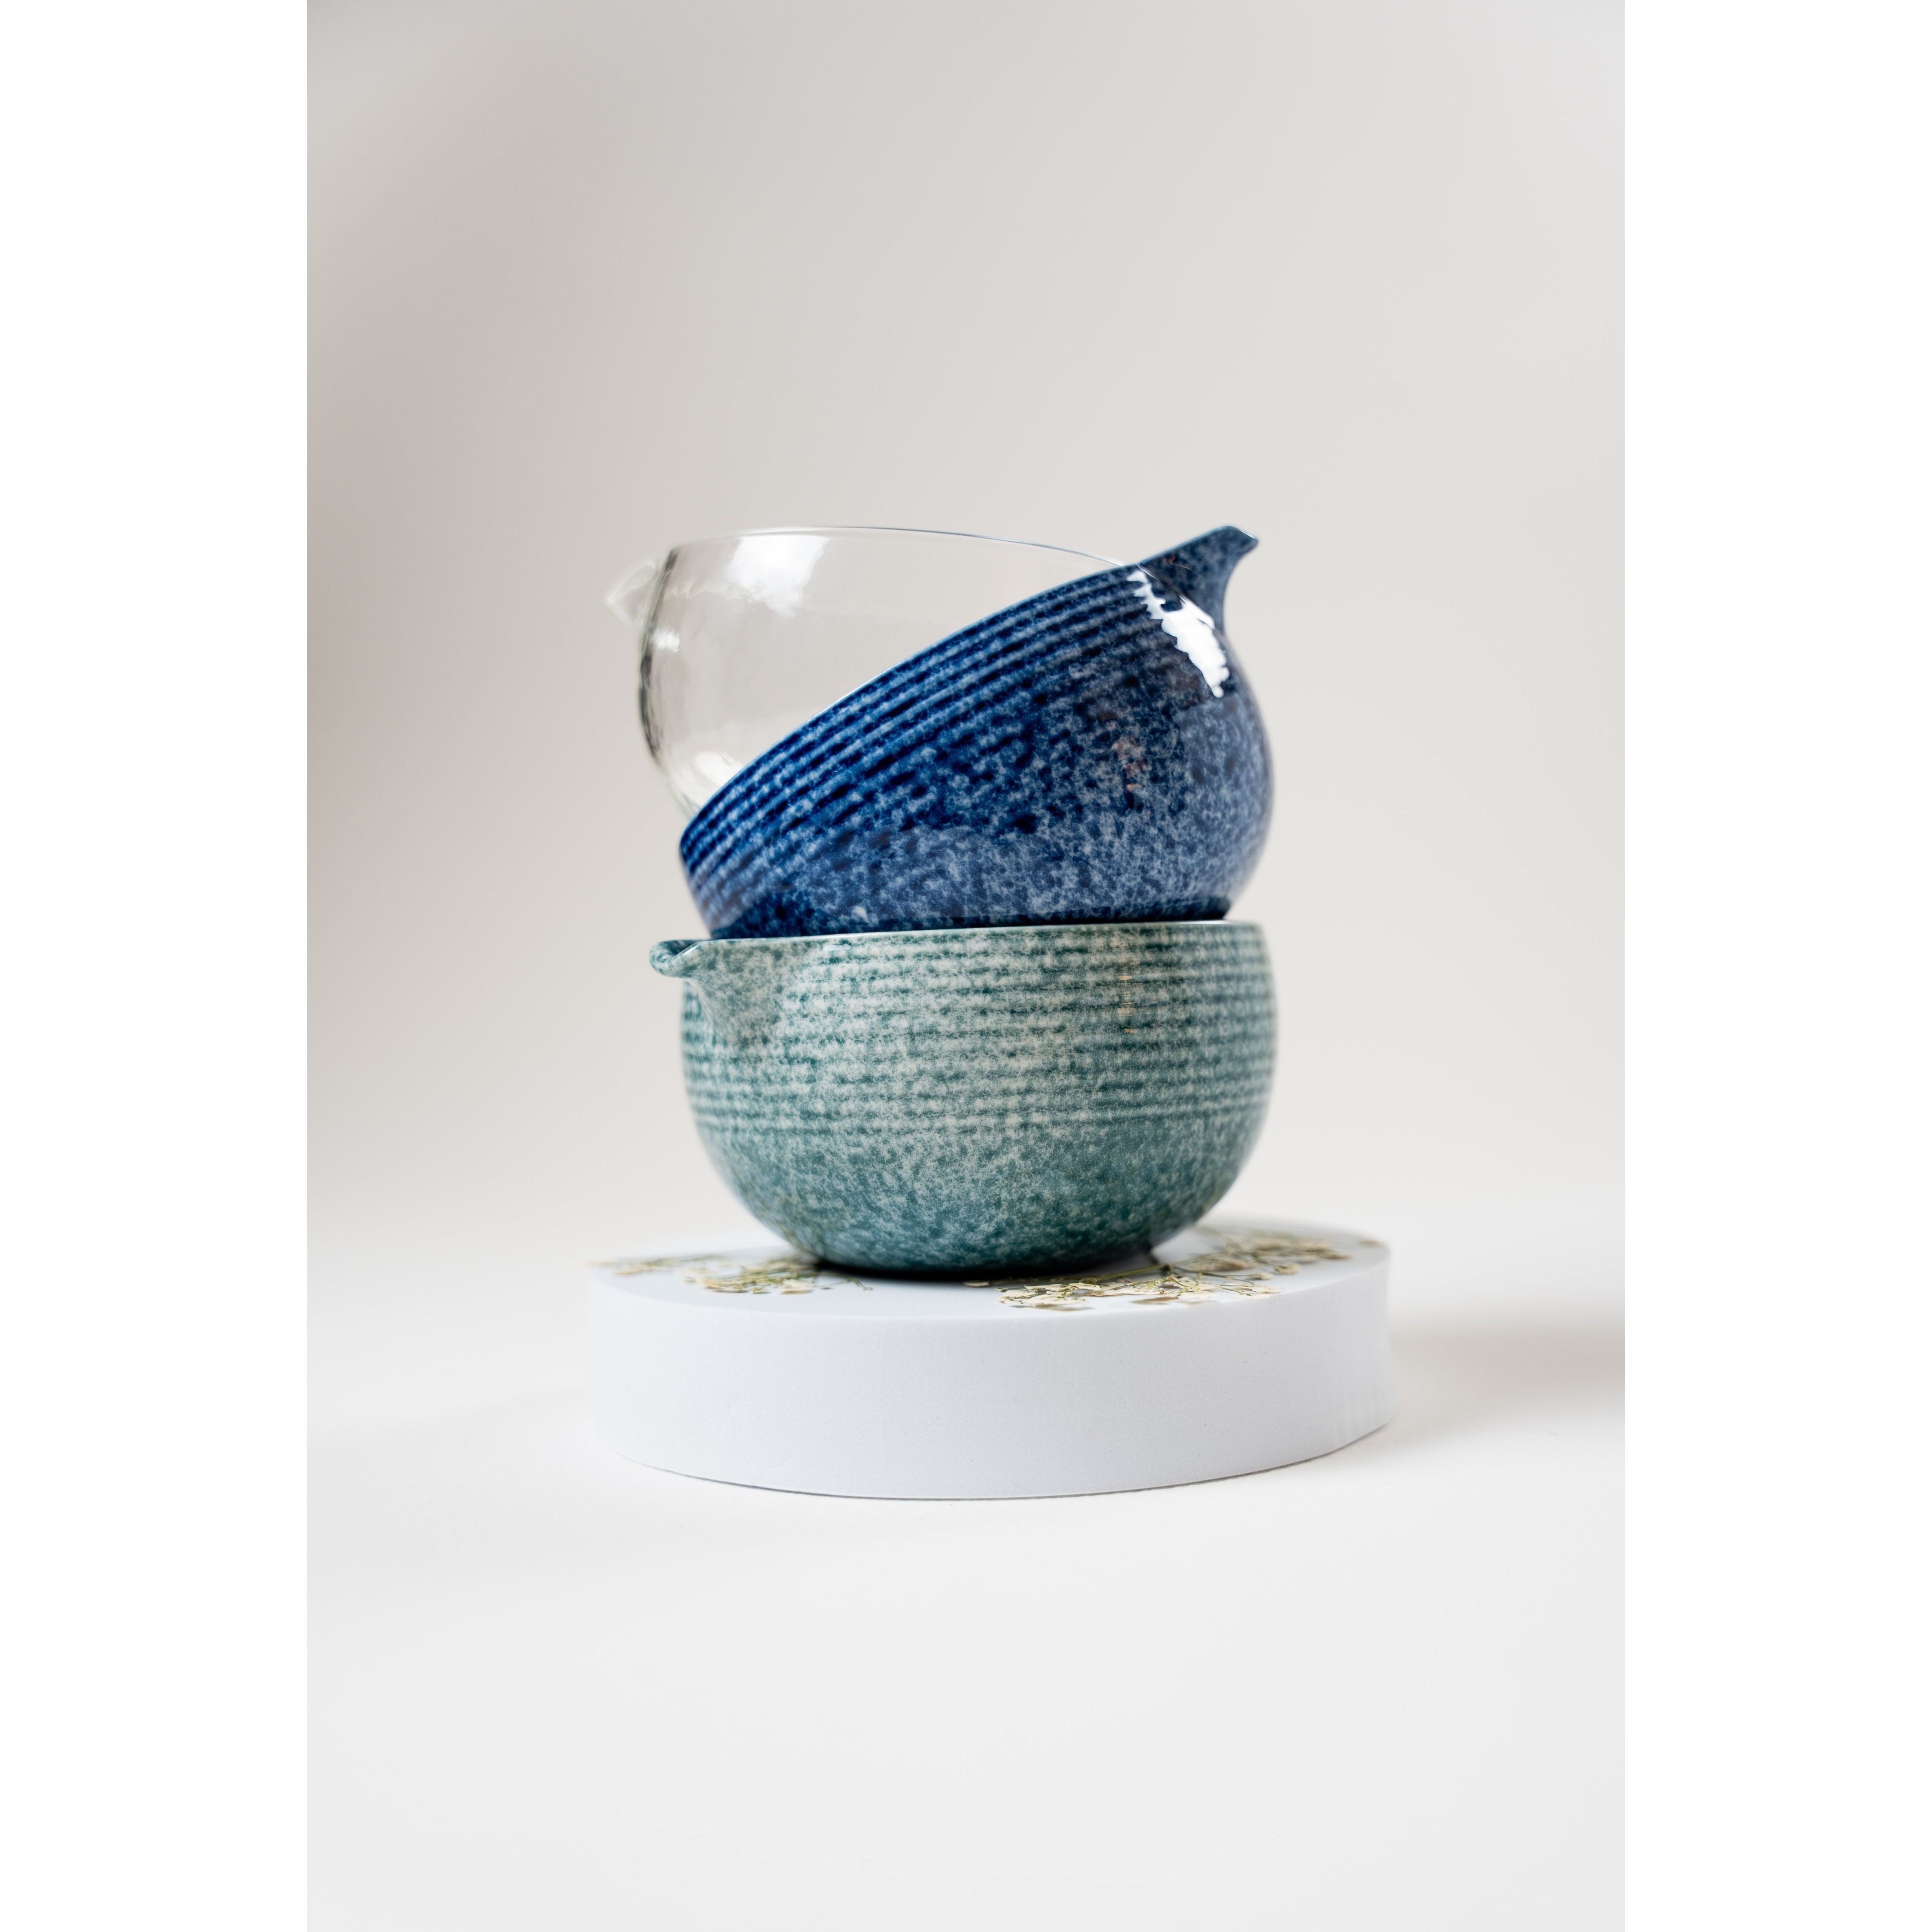 Colored Bowl with Spout, Blue, Aqua, or Pebbled Glass